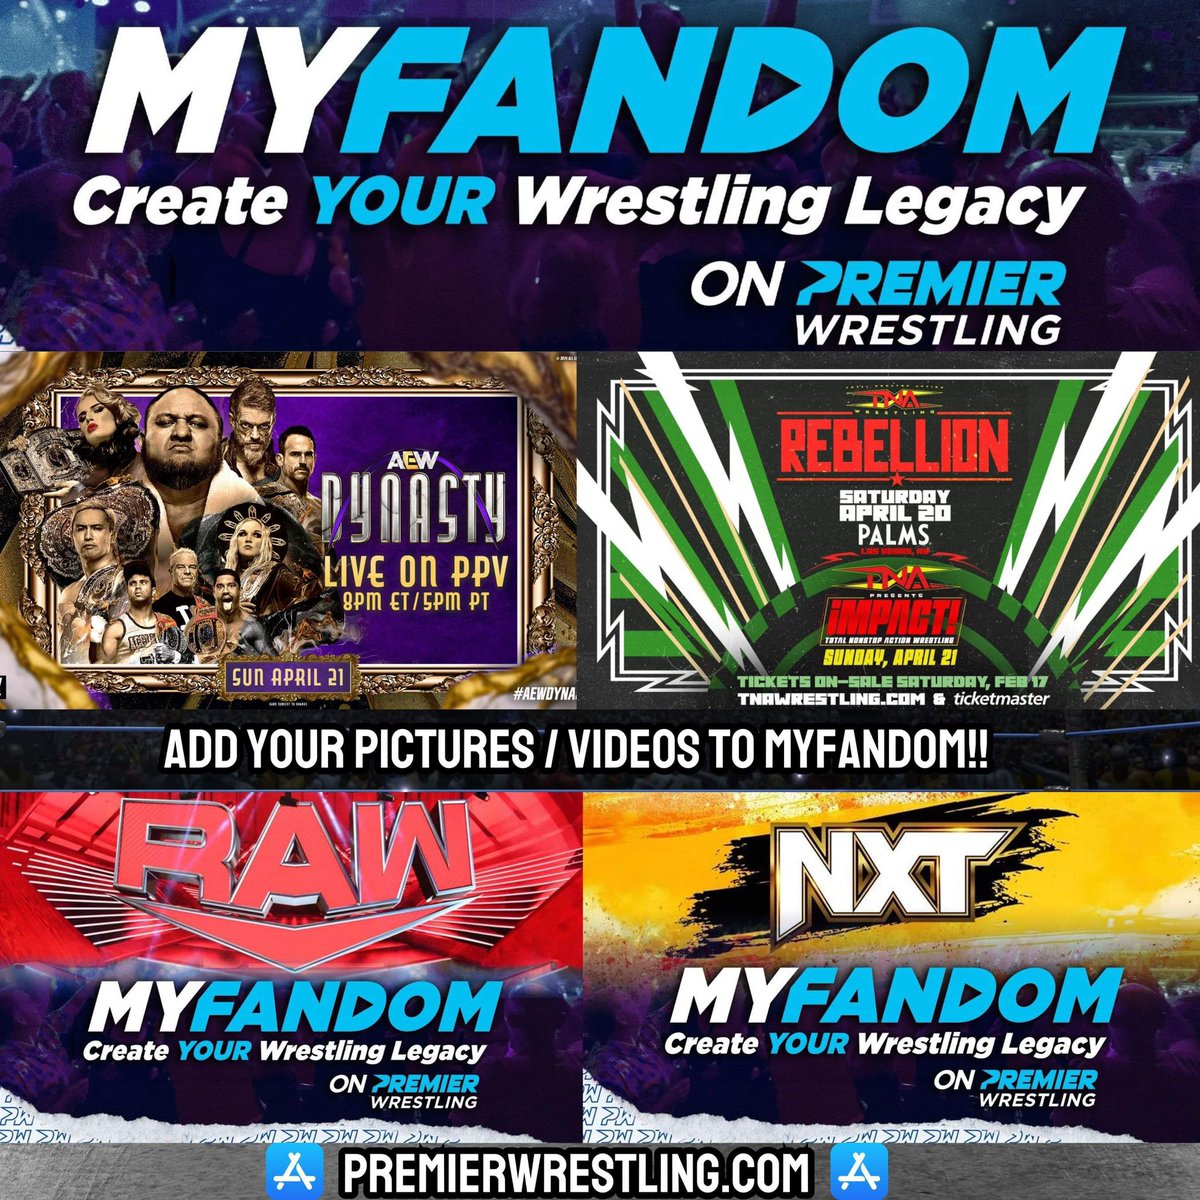 The Last 3 Nights have been HISTORIC in Professional Wrestling across the board and it continues tonight! TNA Rebellion was incredible! AEW Dynasty made history, WWE Raw crowned a NEW Women's champion and tonight coming off the UFC News, NXT Goes LIVE! Did you attend any of these…